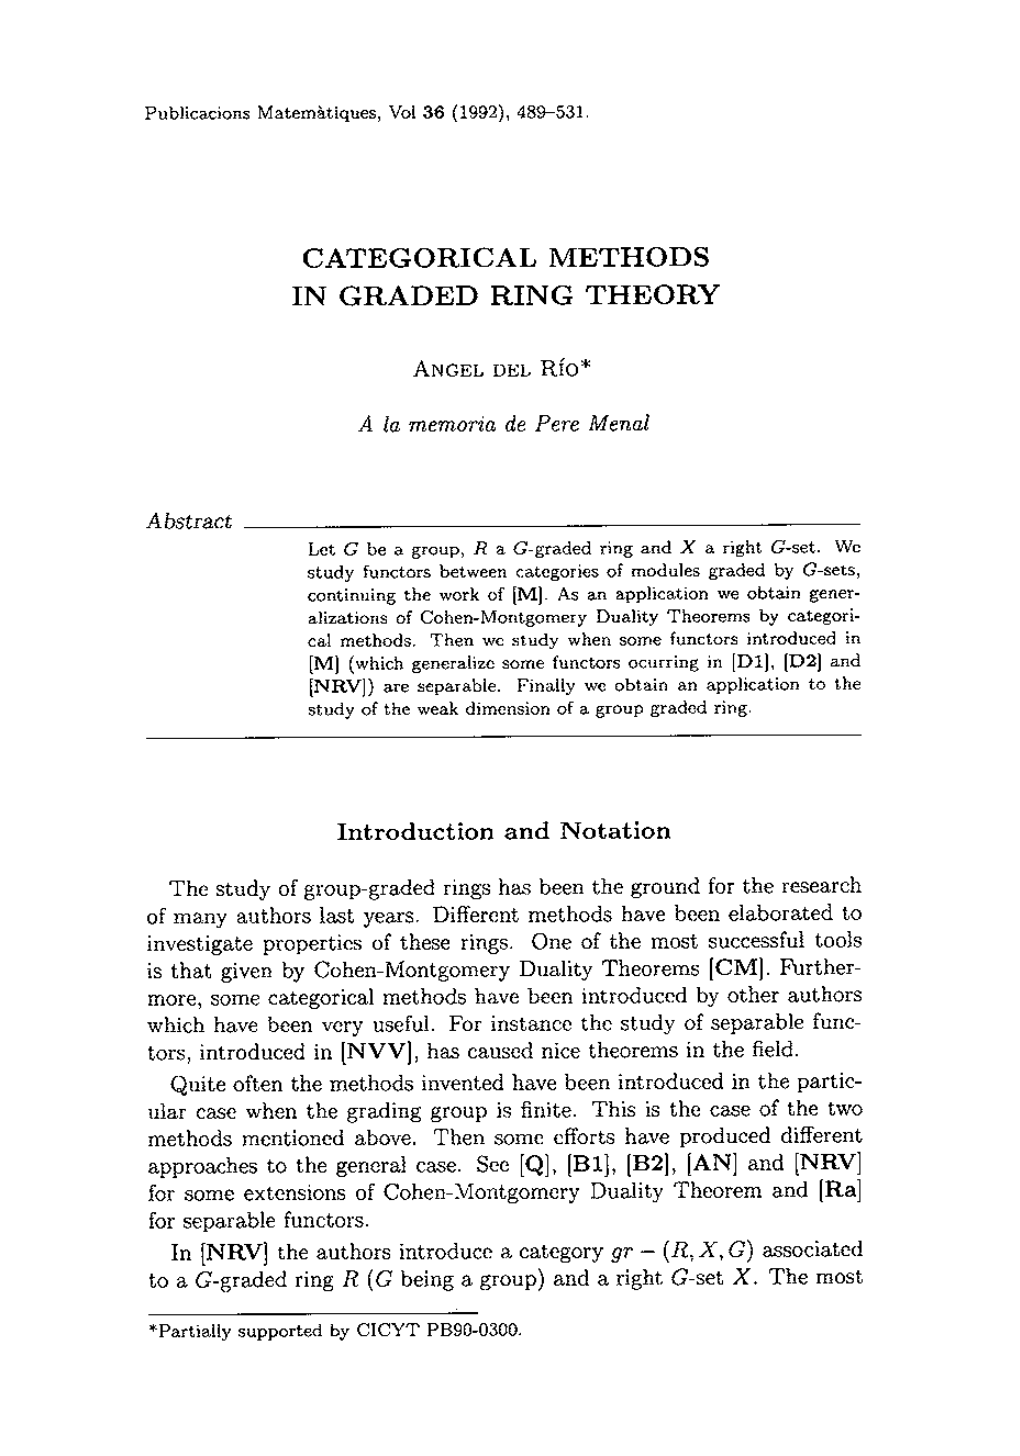 Abstract CATEGORICAL METHODS in GRADED RING THEORY ANGEL DEL Río* a La Memoria De Pere Menal Introduction and Notation the Stud